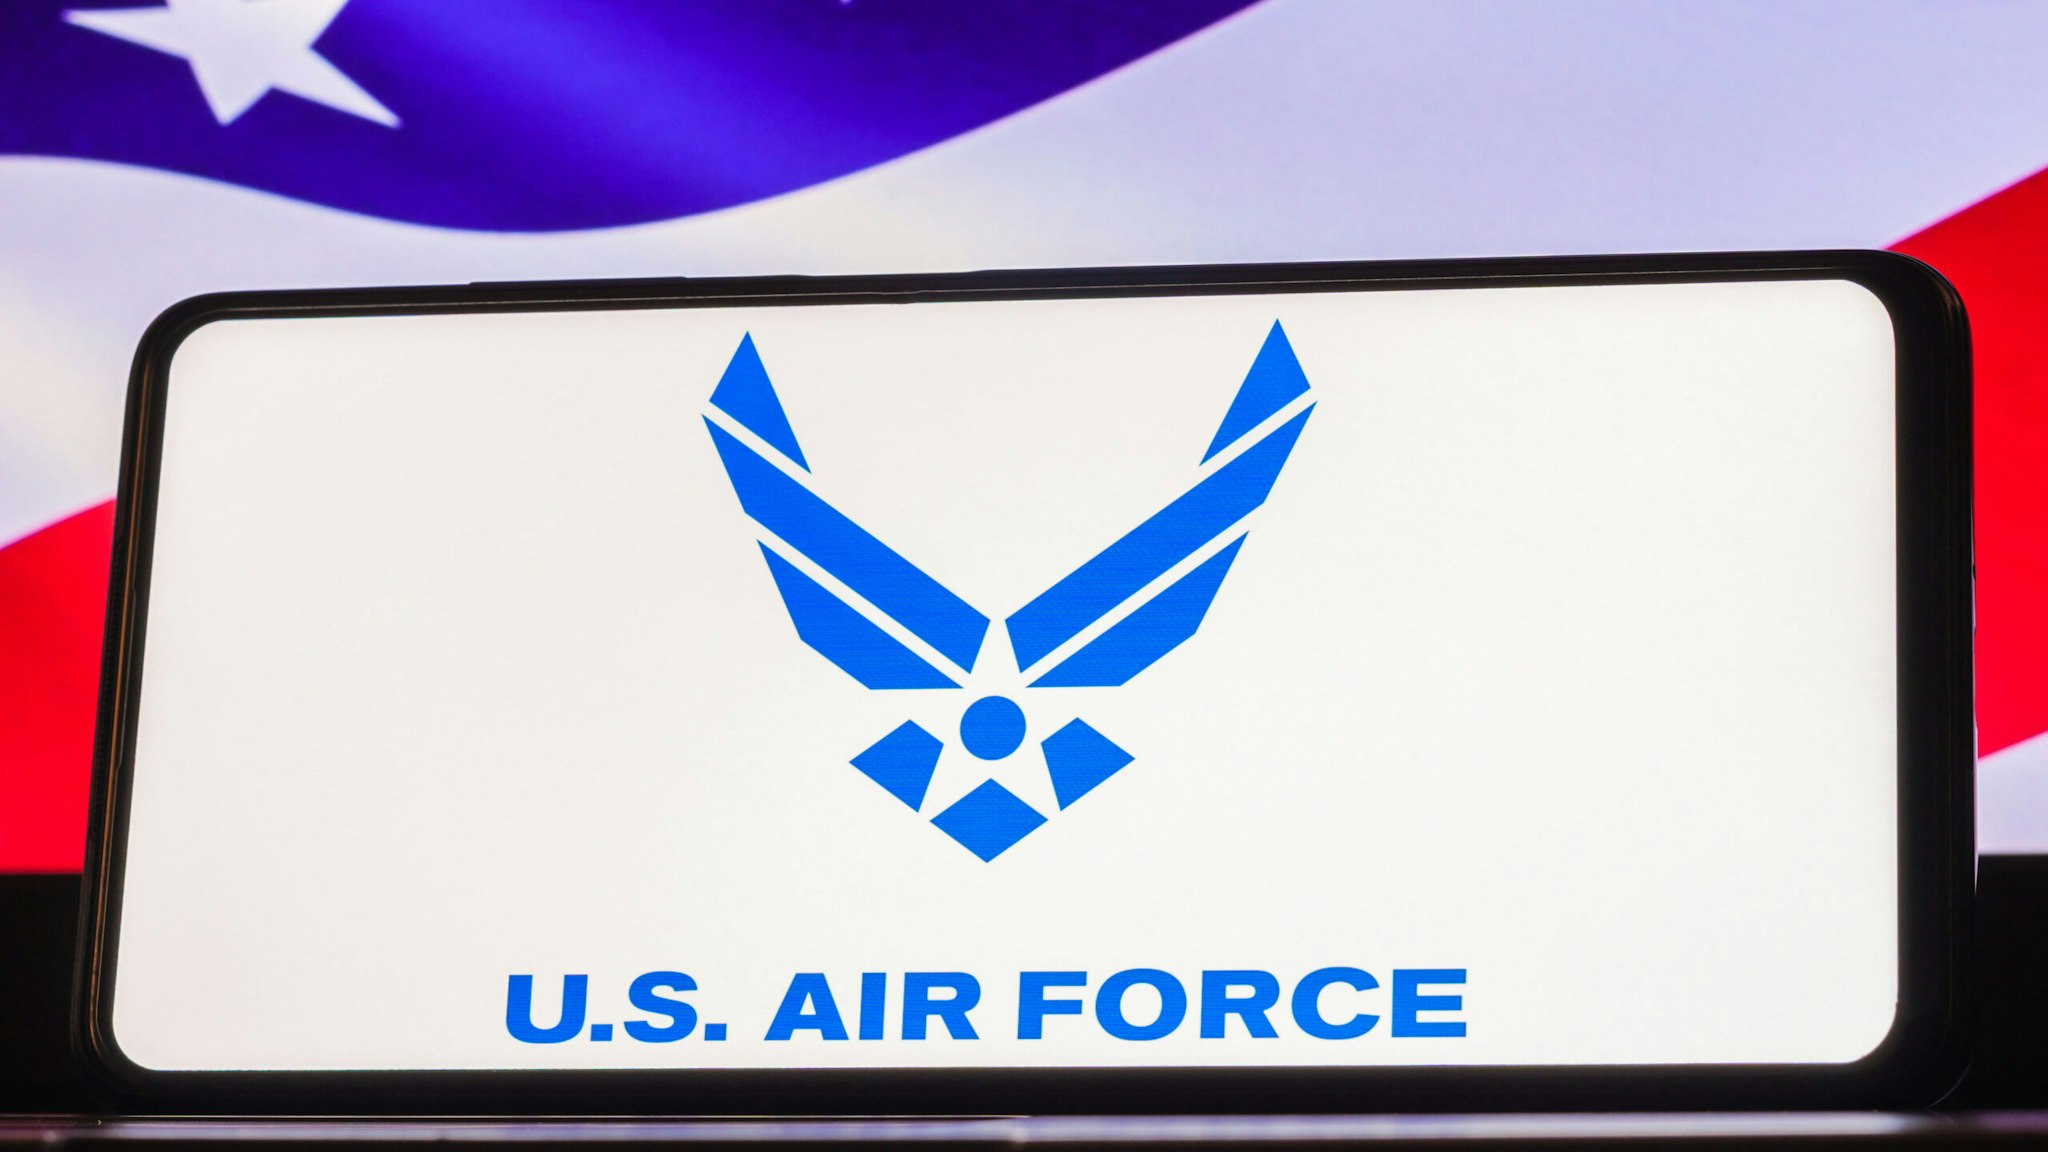 BRAZIL - 2023/03/22: In this photo illustration, the United States Air Force (USAF) logo seen displayed on a smartphone screen, United States of America flag in the background.